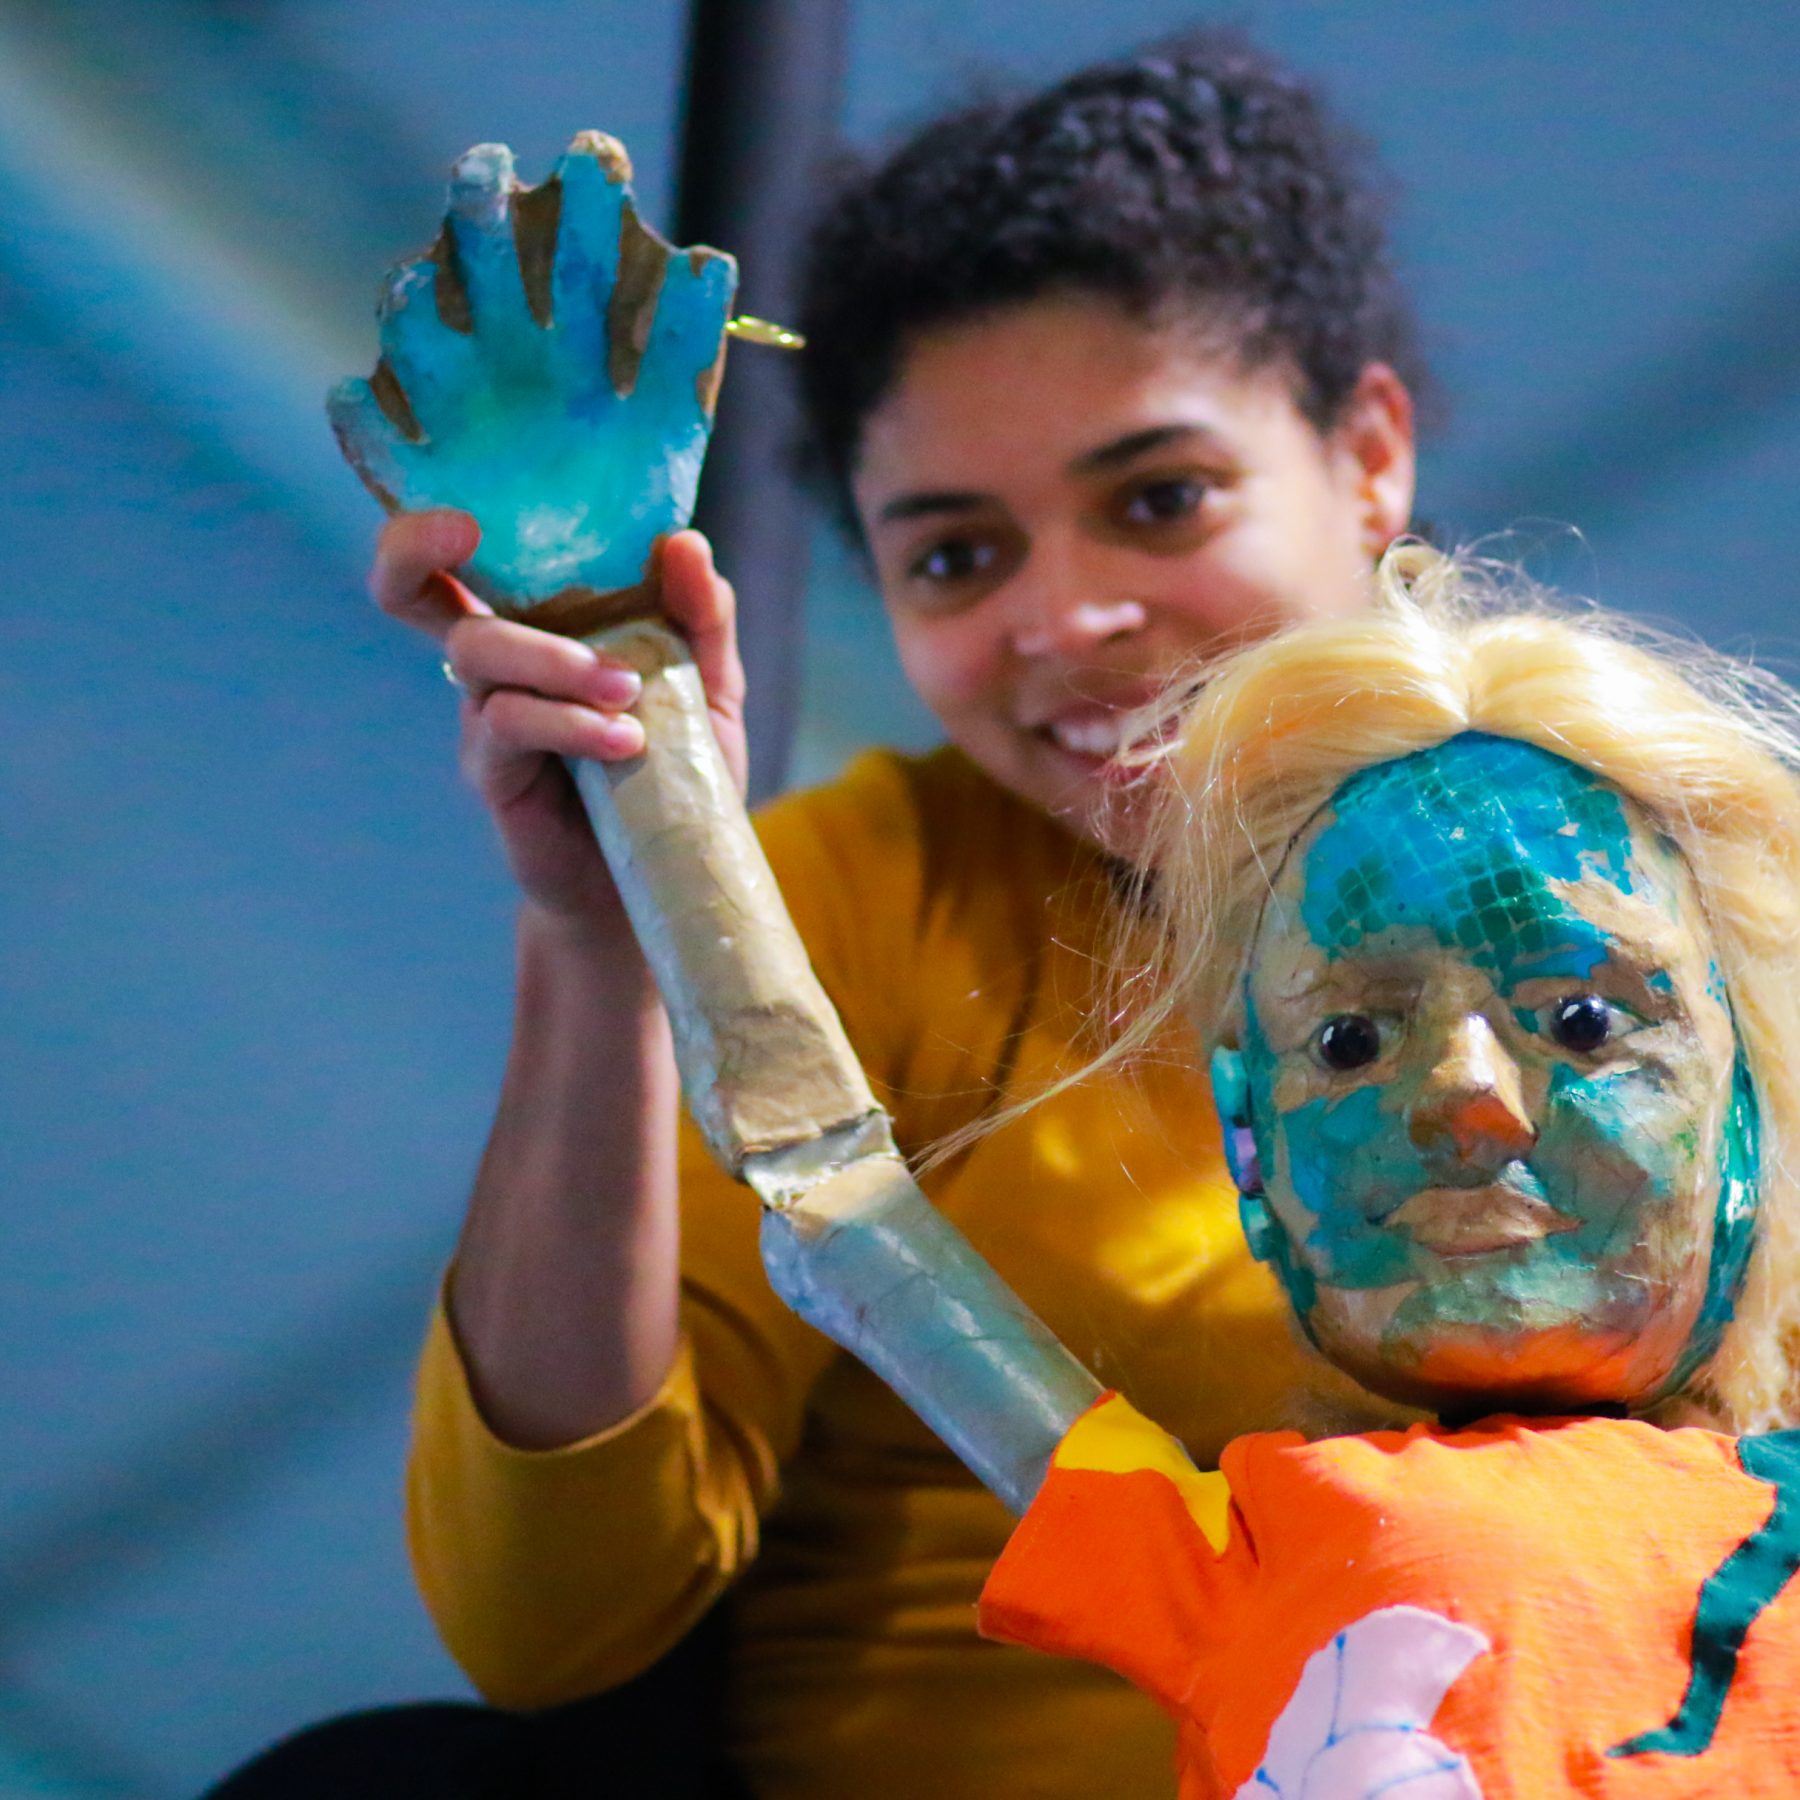 A young mixed-race woman is smiling and holding up a puppet of a girl with blond hair, an orange top and fish-like turquoise scales of her face.